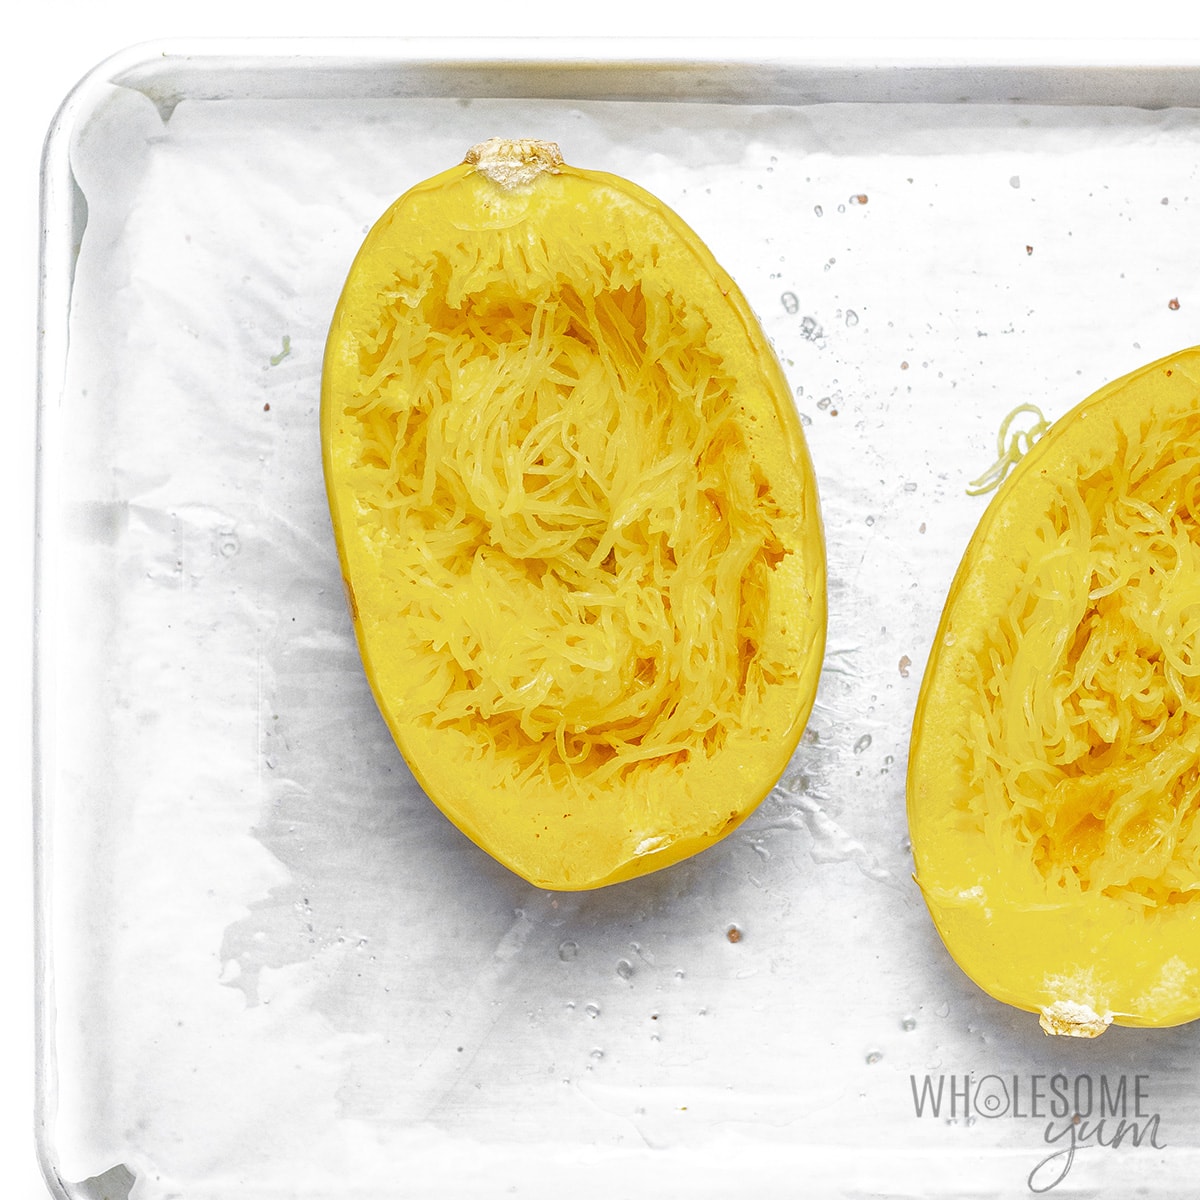 Spaghetti squash shells with strands released inside.